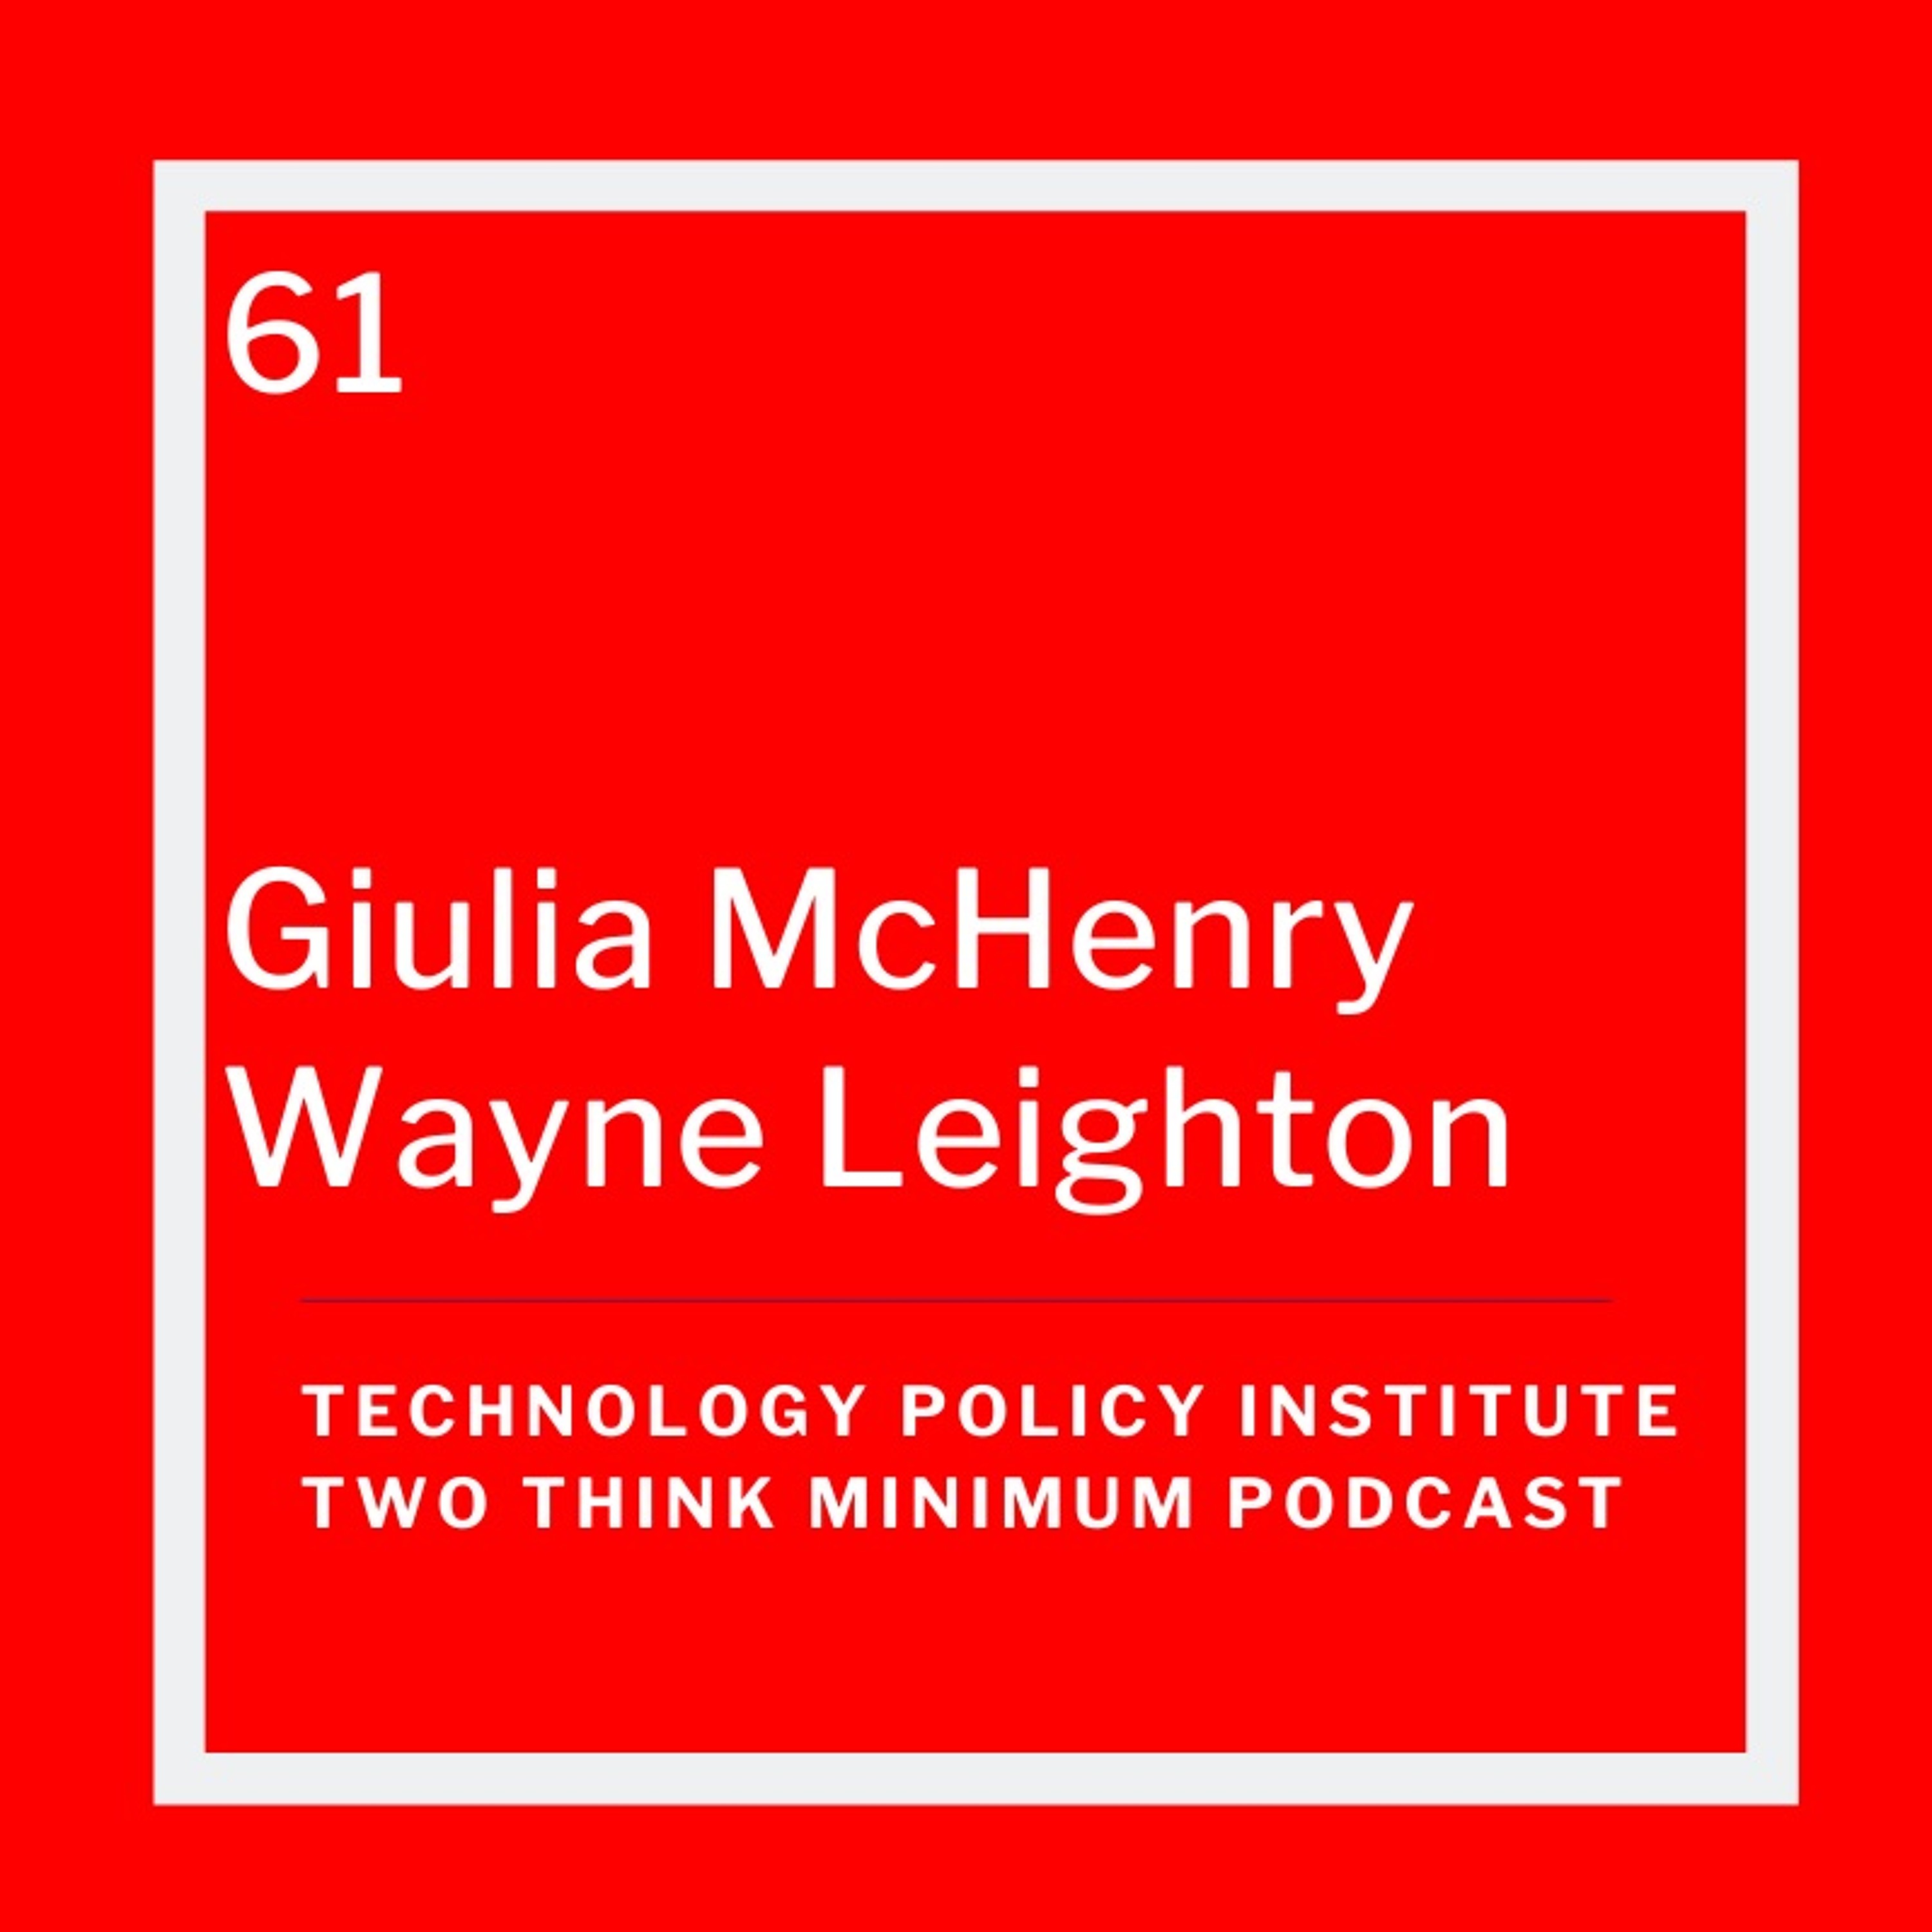 Giulia McHenry and Wayne Leighton on the FCC’s Office of Economics and Analytics